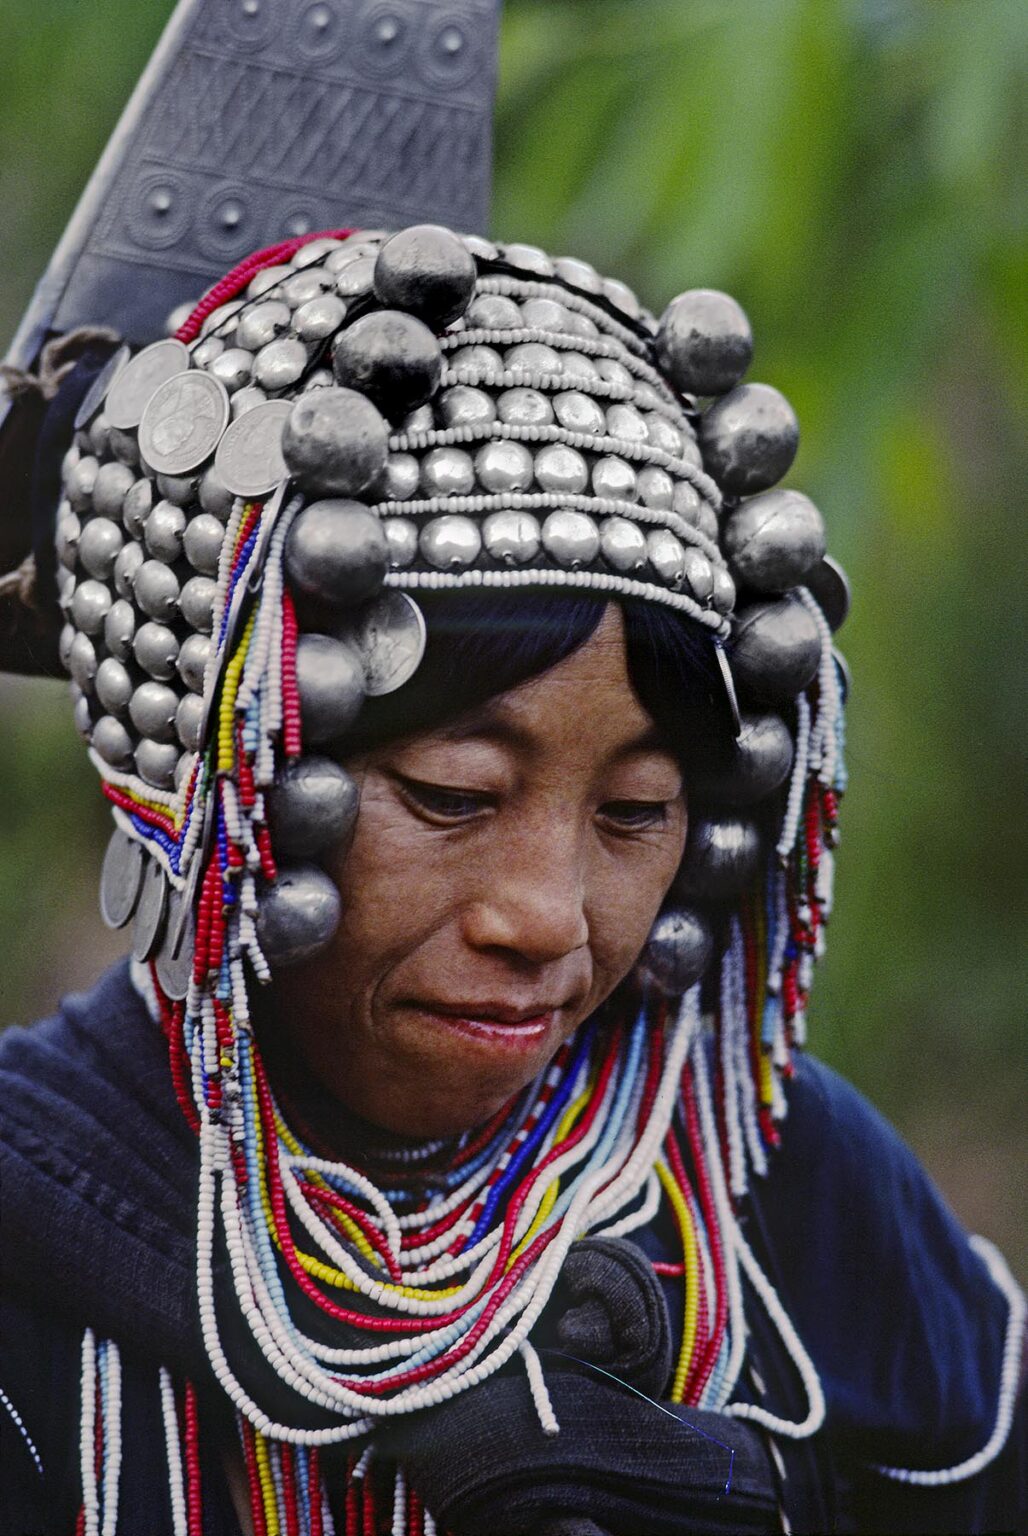 AKHA TRIBAL WOMAN wearing the traditional SILVER HEAD DRESS - NORTHERN, THAILAND